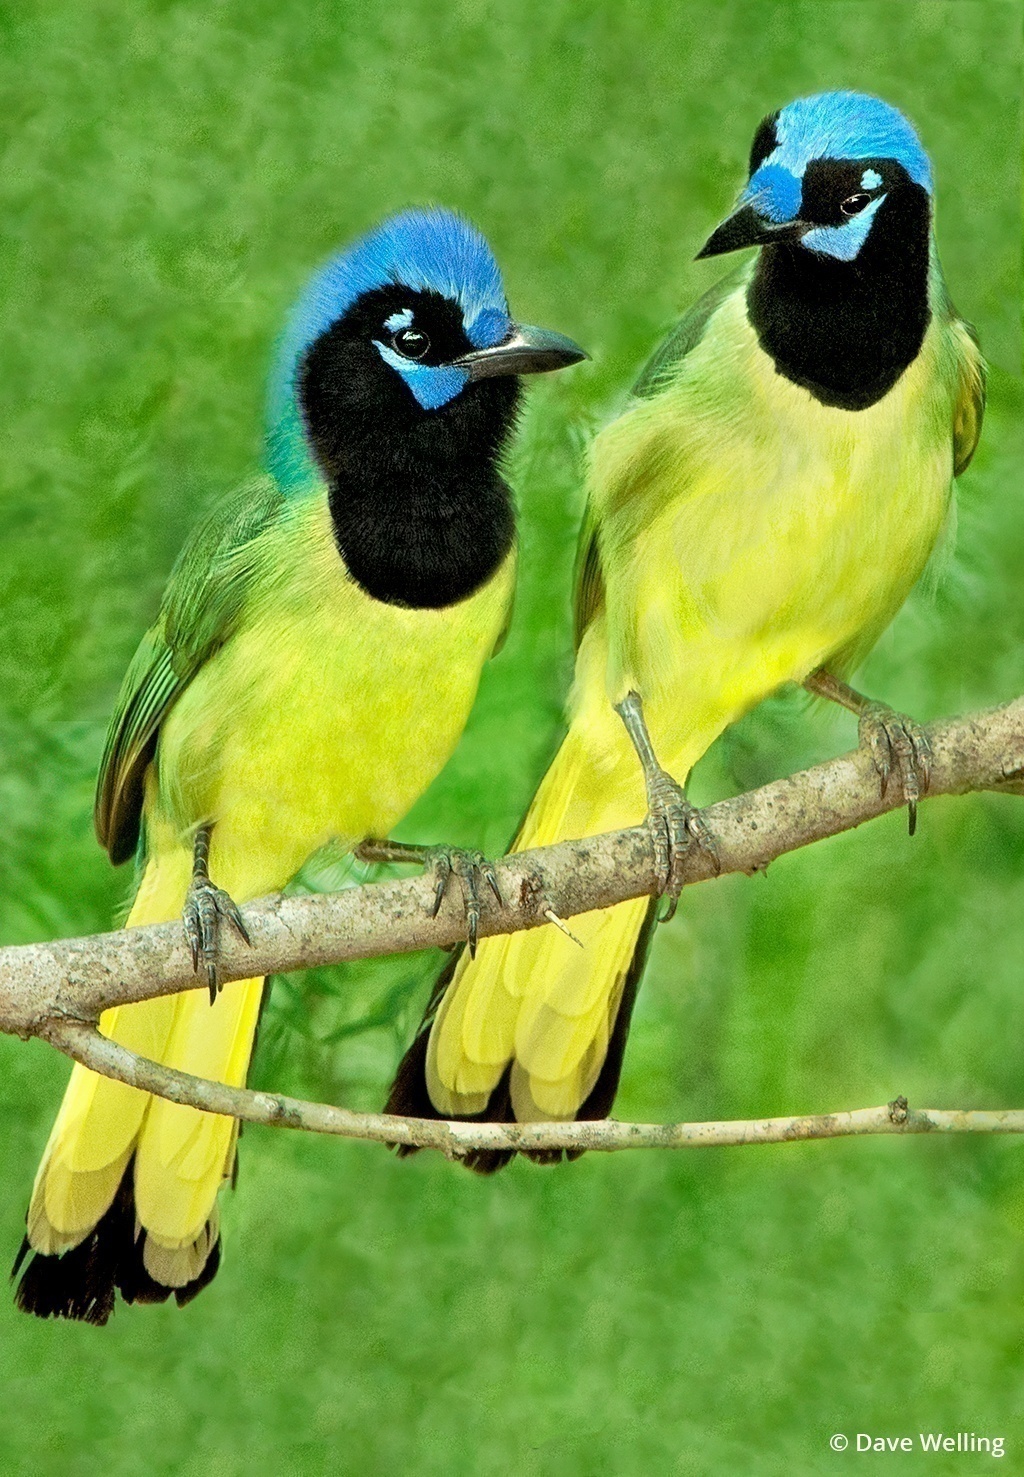 Texas wildlife includes green jays pictured here.